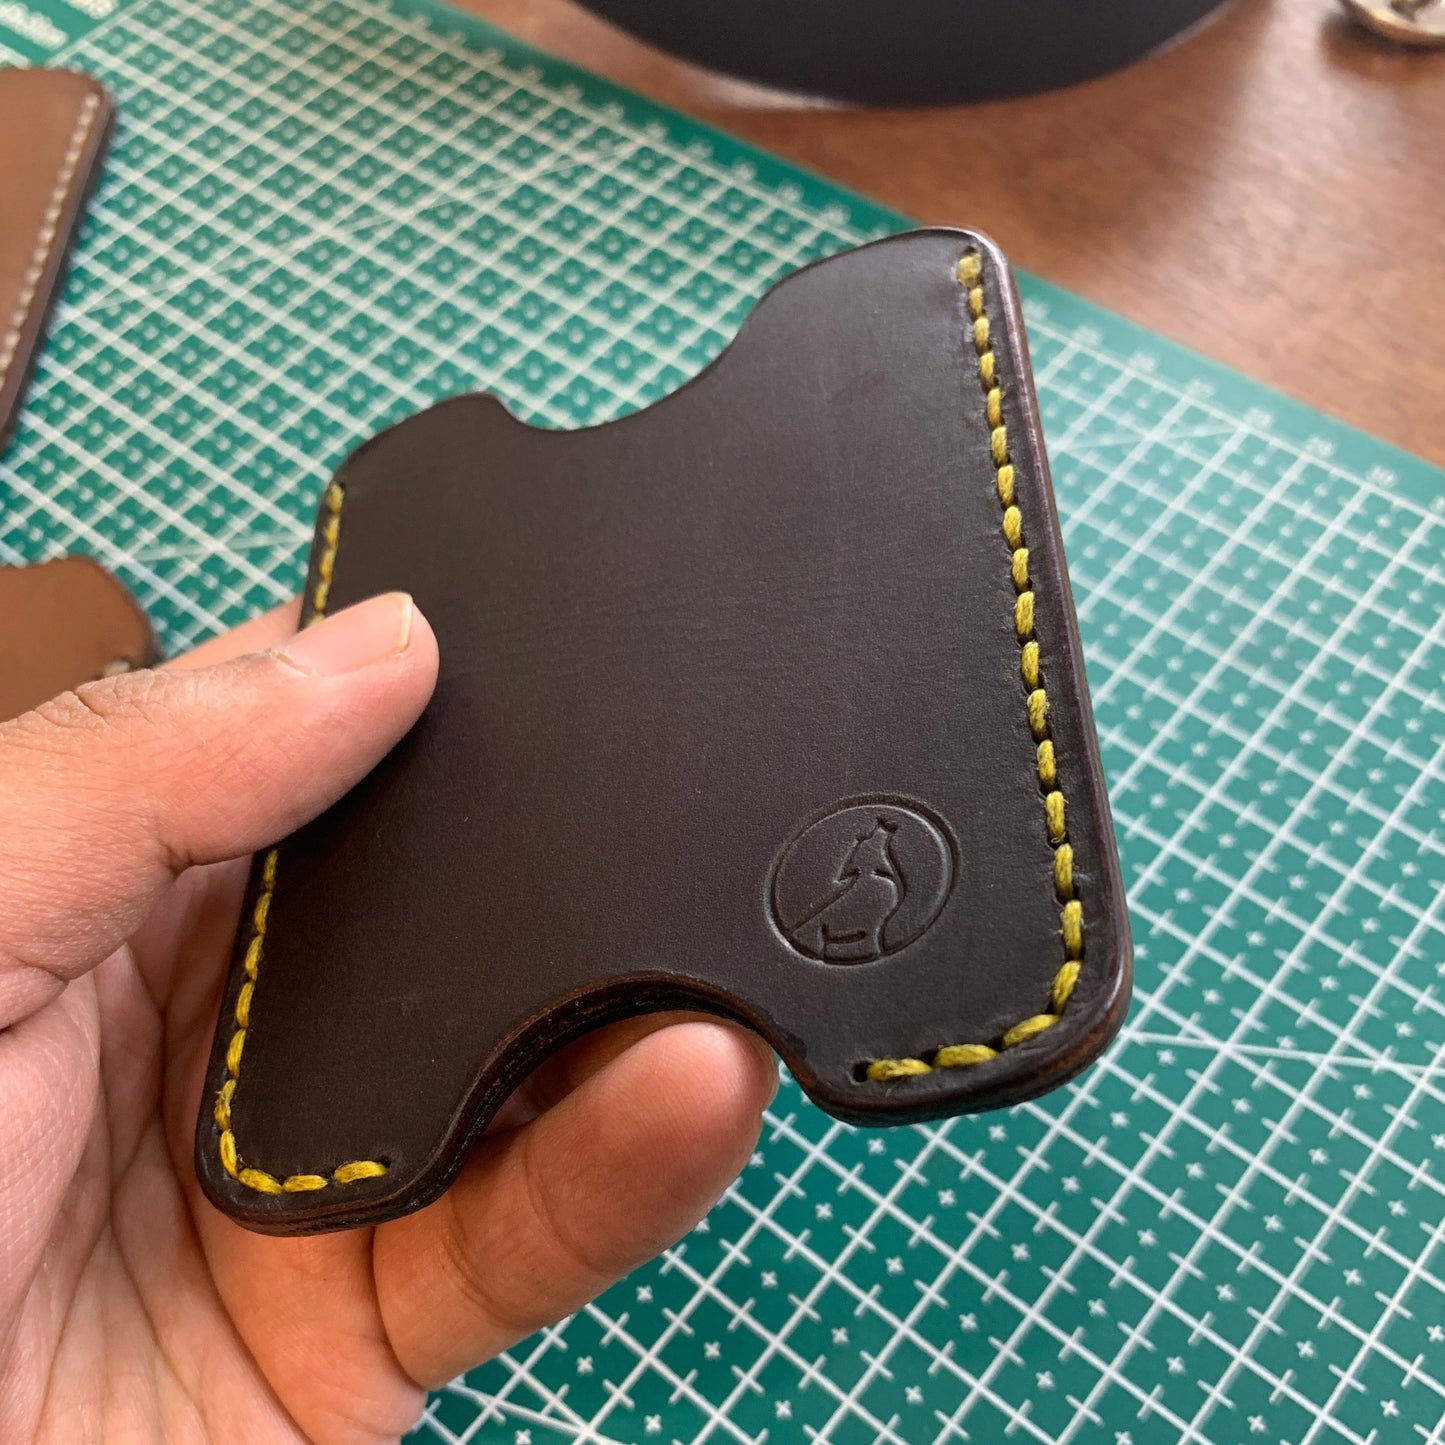 The Oval: A Leather Cardholder